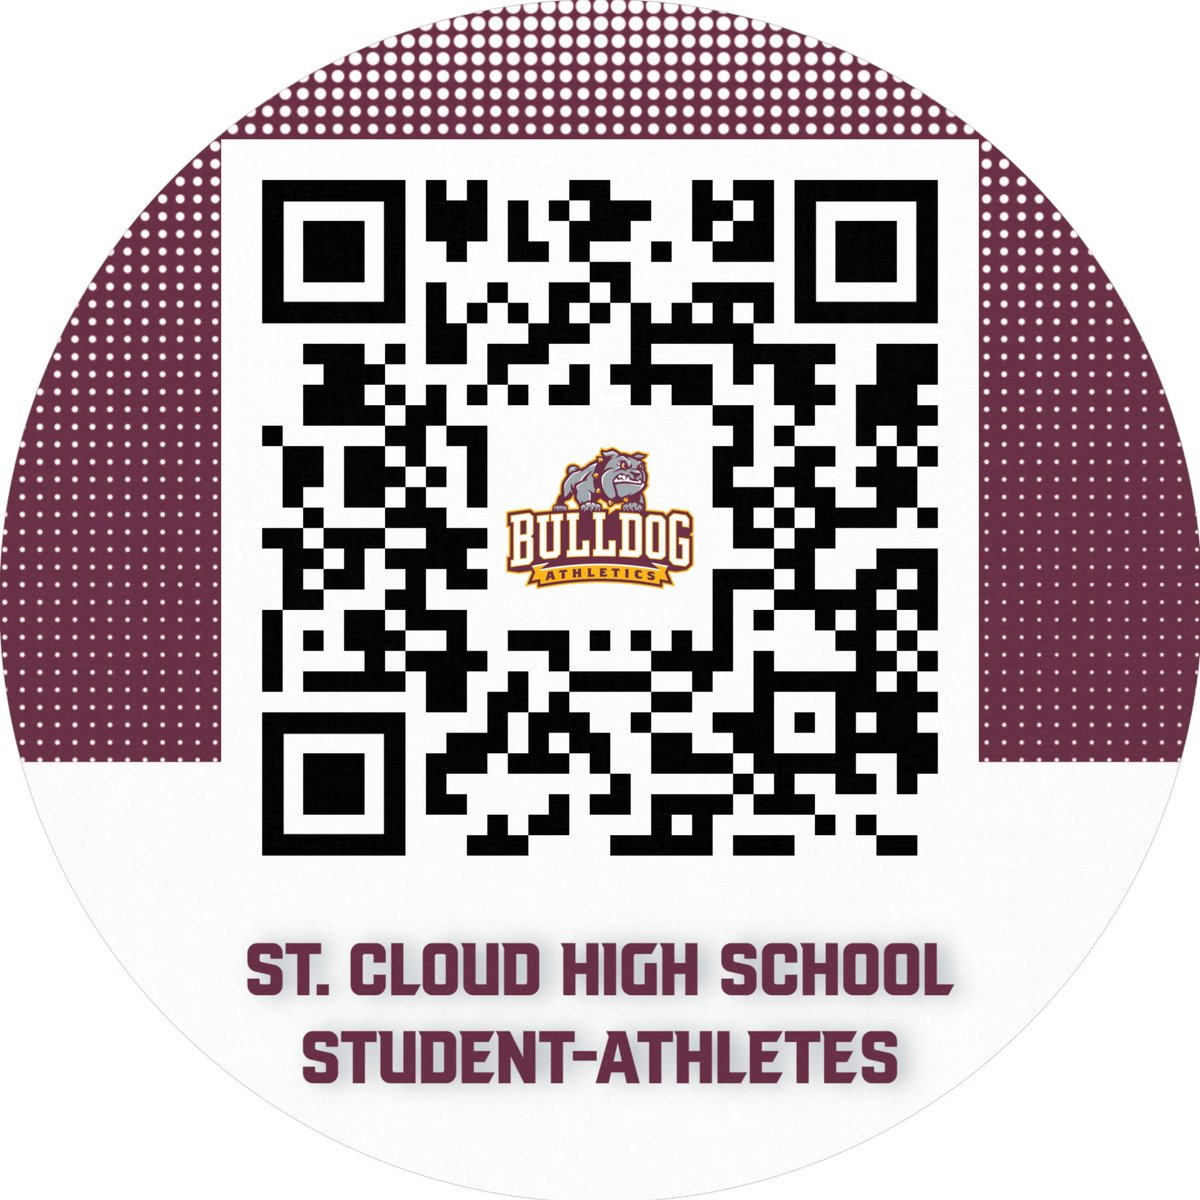 ATTENTION ALL STUDENT ATHLETES PLEASE REGISTER FOR AKTIVATE 24-25 SEASON! YOU MUST HAVE AN UPDATED AKTIVATE ACCOUNT ON FILE TO PARTICIPATE IN SPORTS AT ST. CLOUD HS!!!